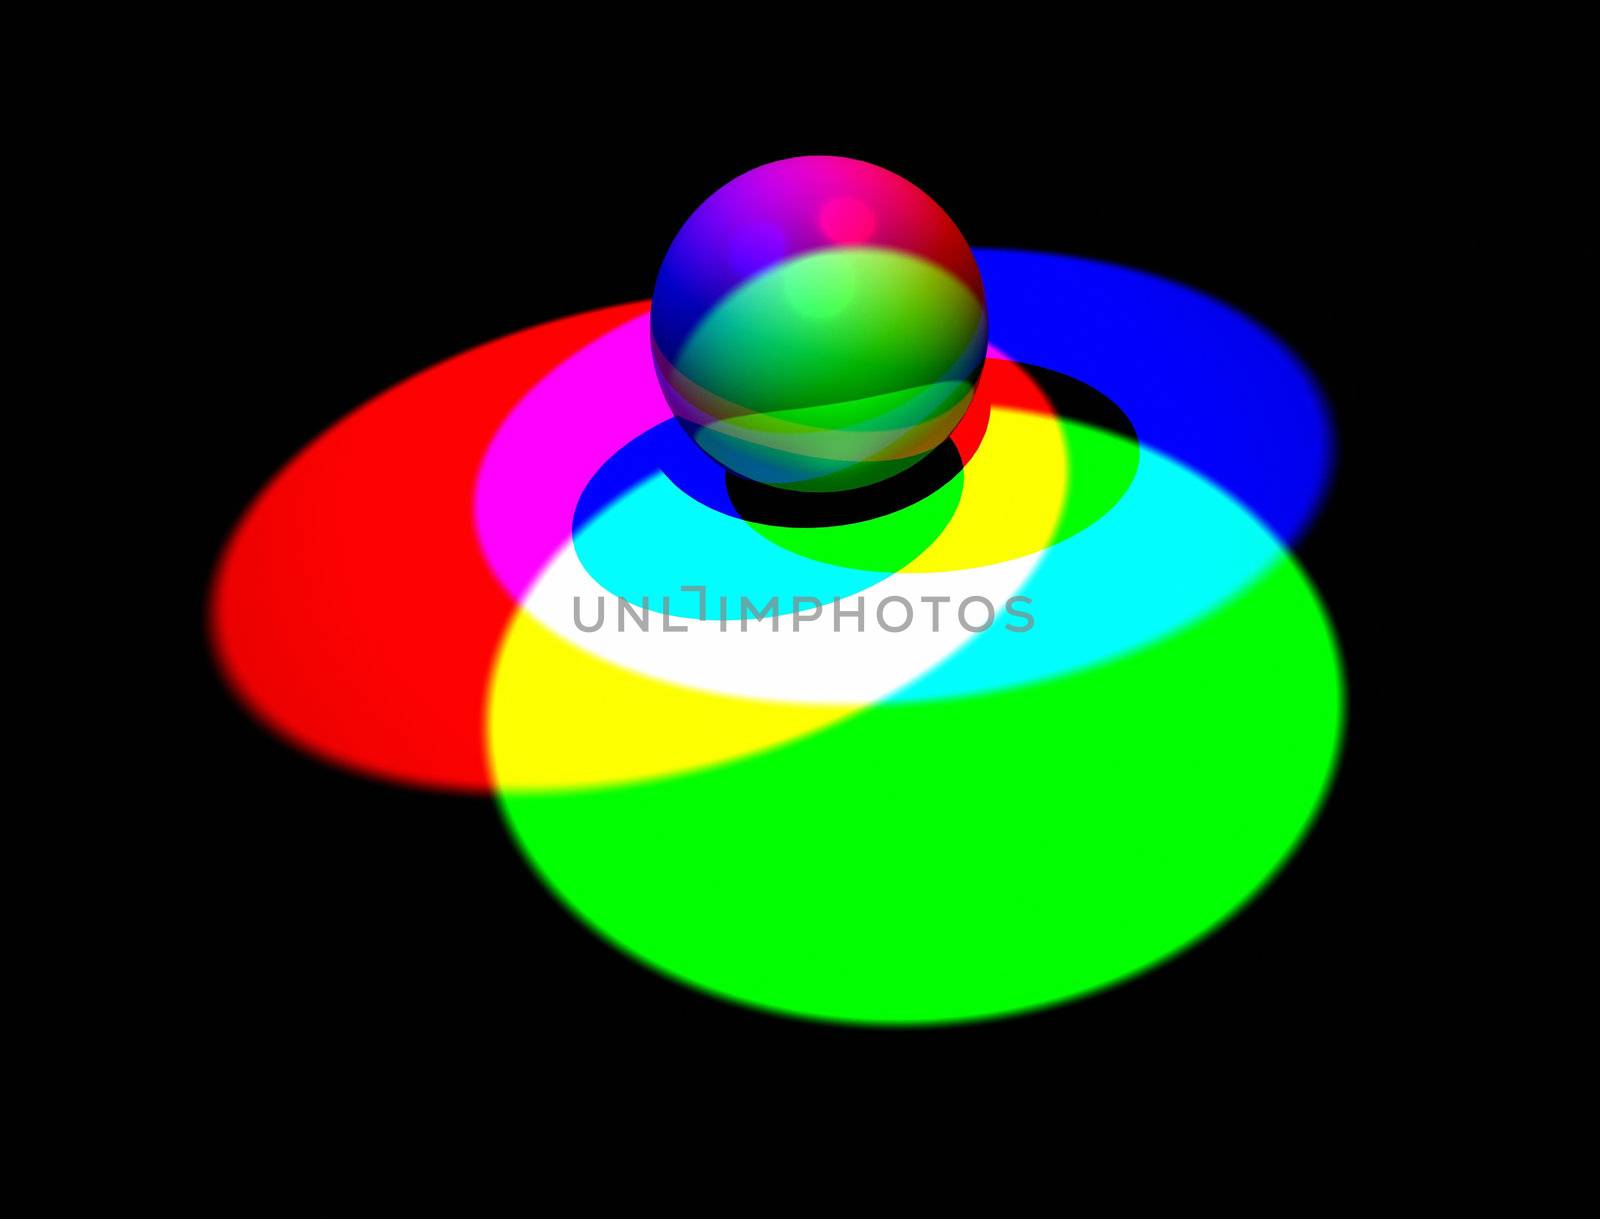 An image of the RGB lights with a sphere